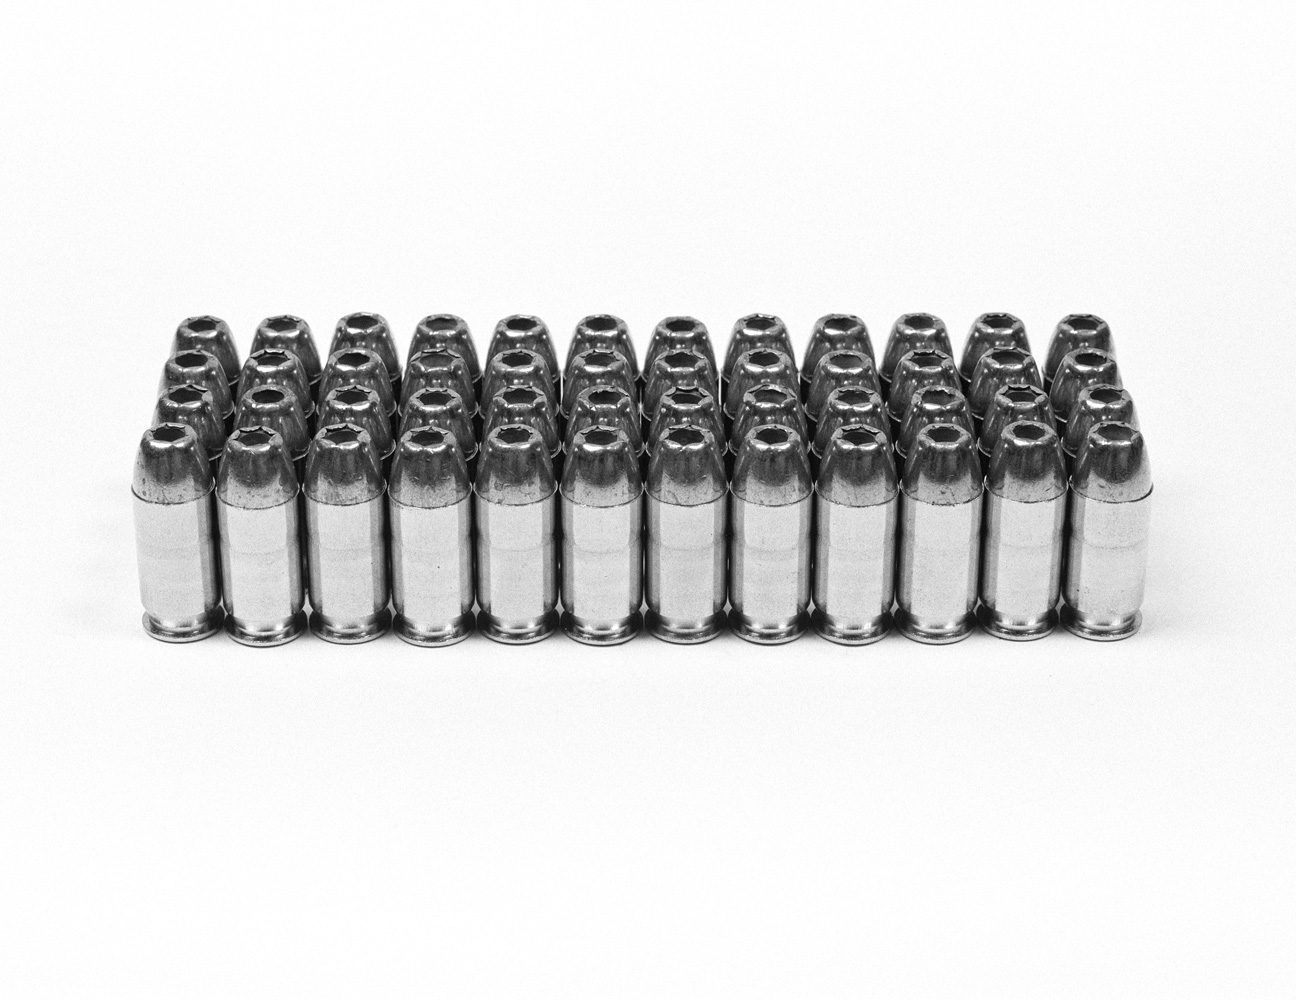 America's ammunition of choice: the hollow-point, designed to maximize damage by fragmenting and 'mushrooming' on impact. These bullets are banned from use in war by the Geneva Convention.